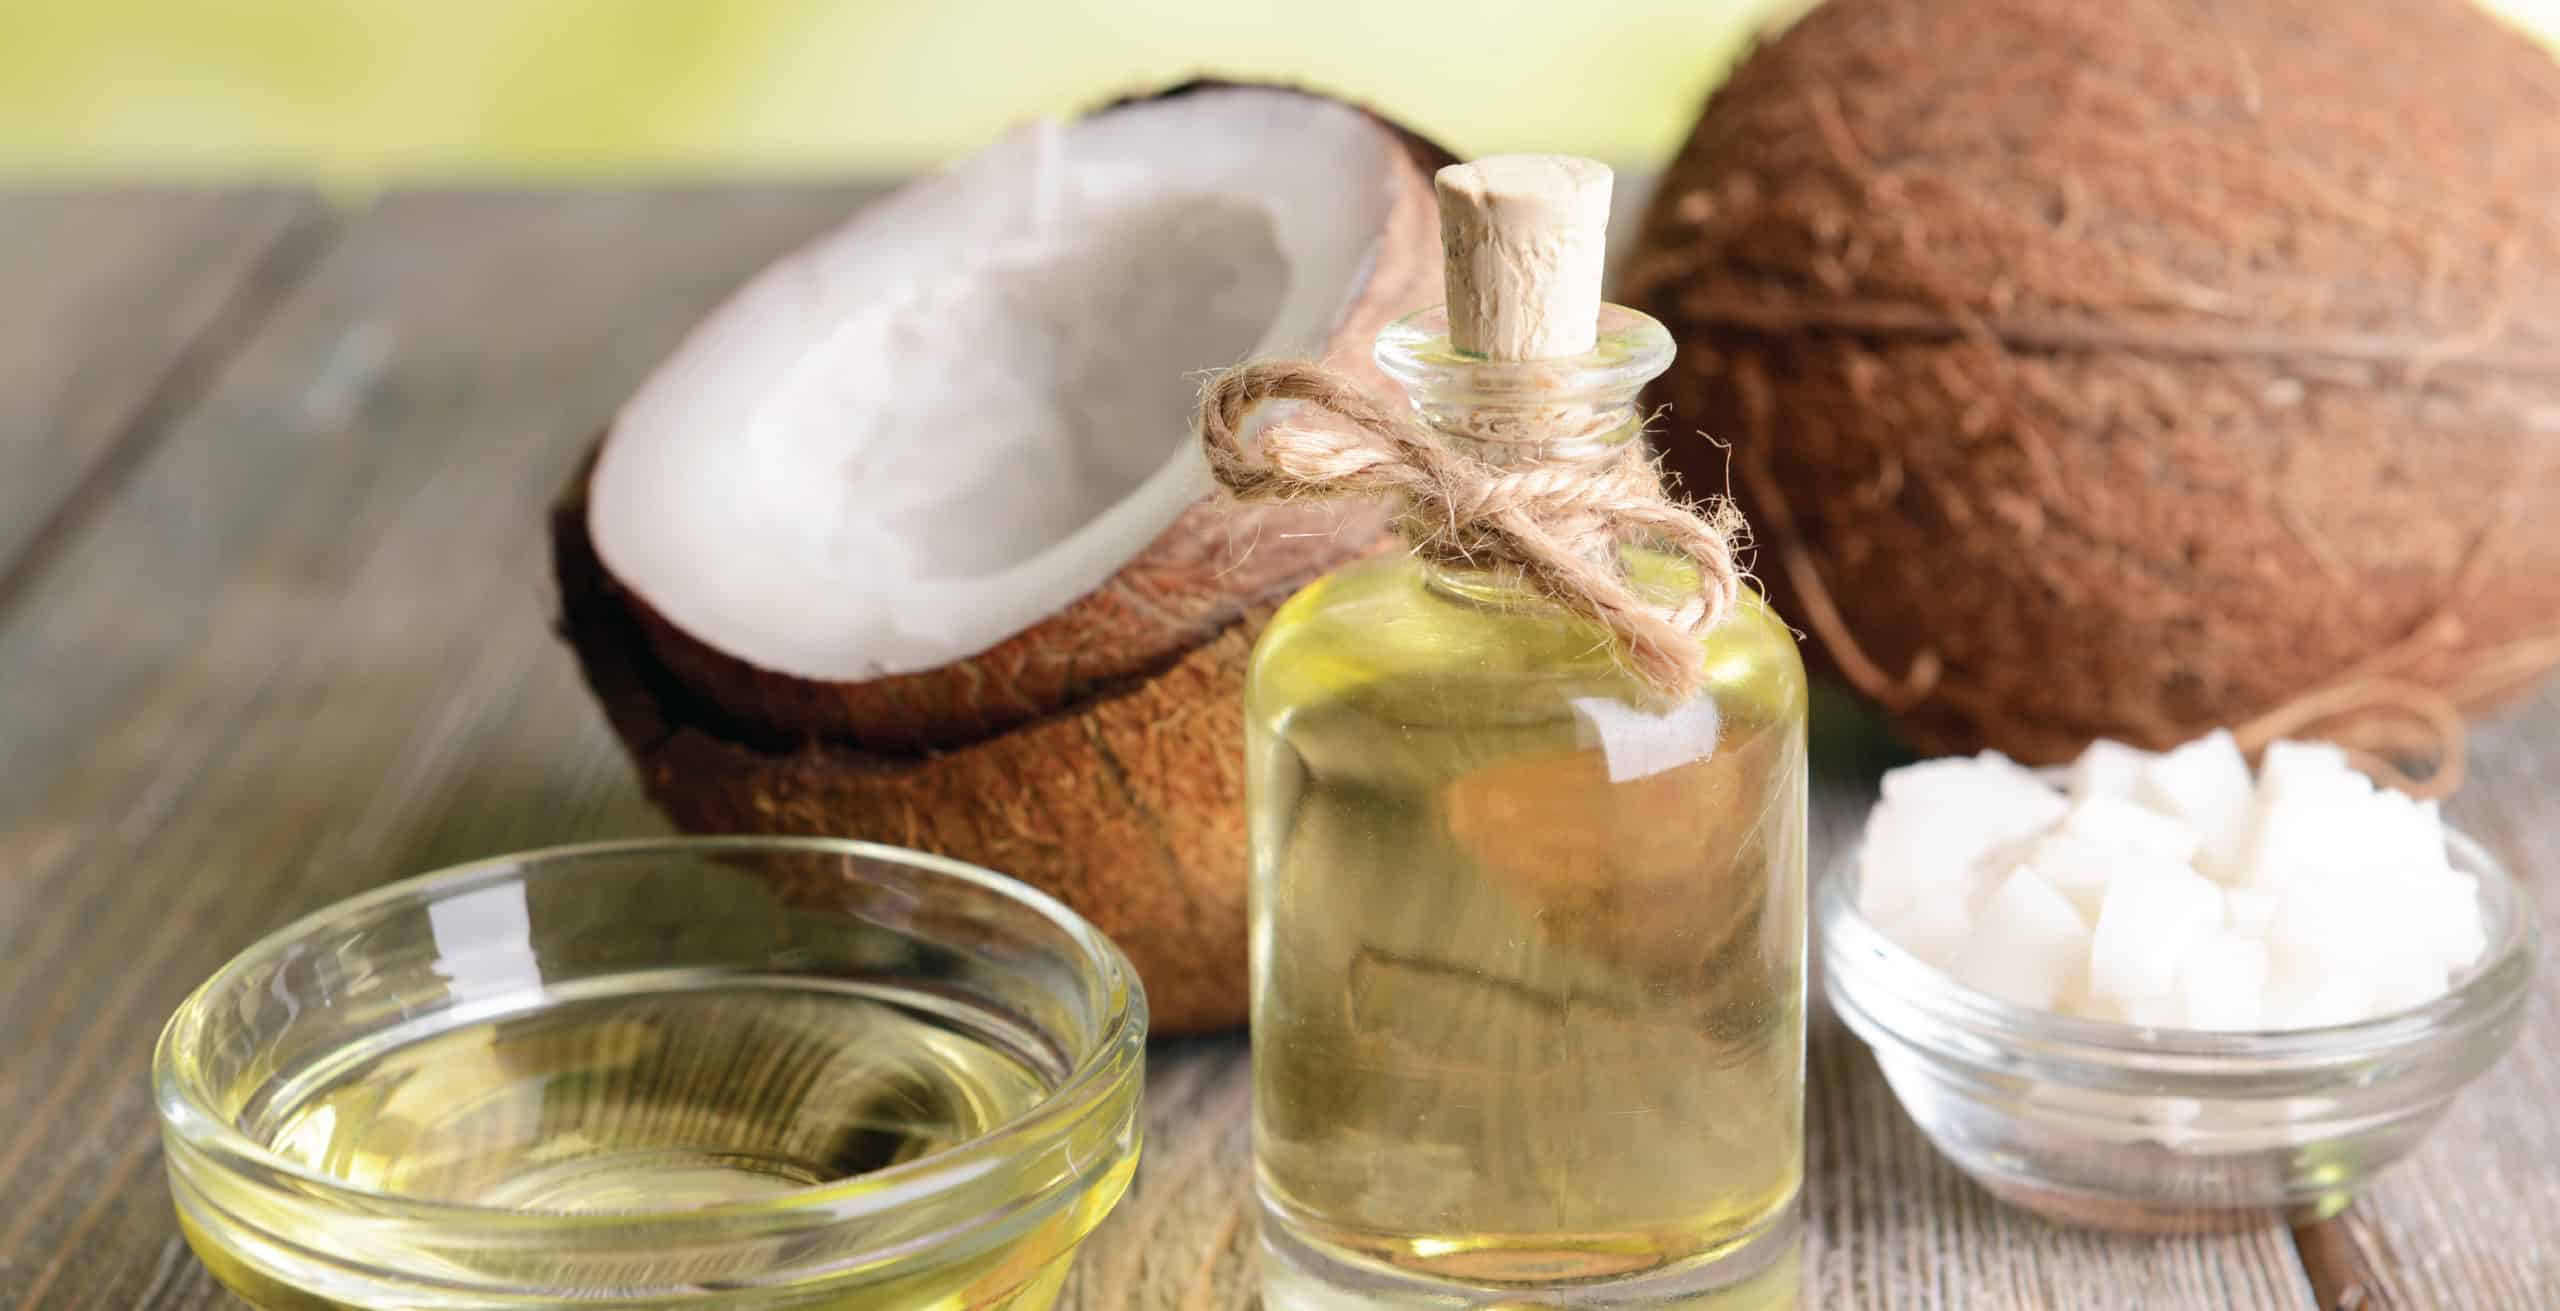 Coconut Oil for Skin: 23 Uses and DIY Recipes - Dr. Axe